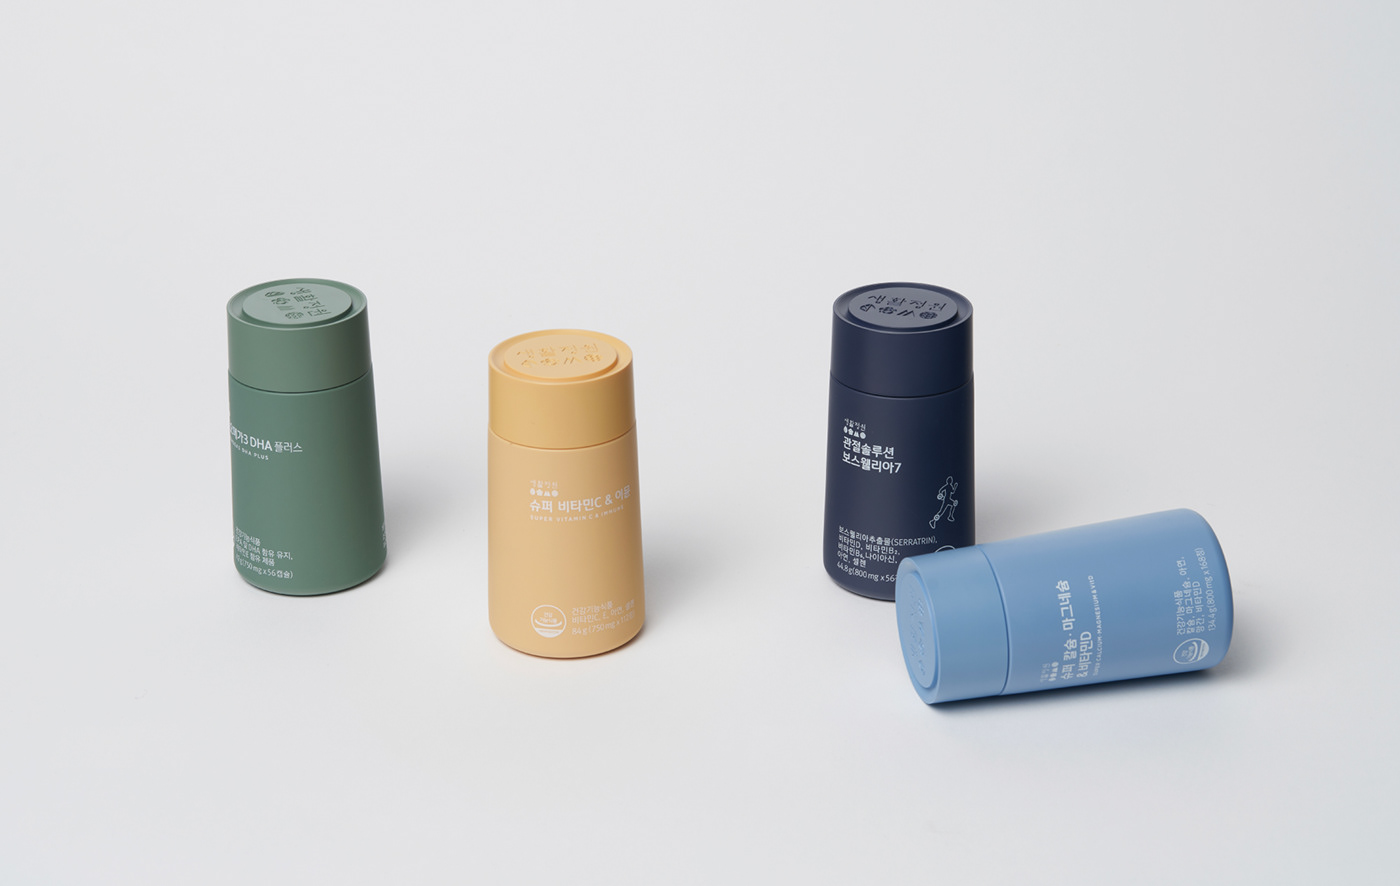 industrial design  product design foundfounded 机器人设计 슈어맨검증완료 health food container